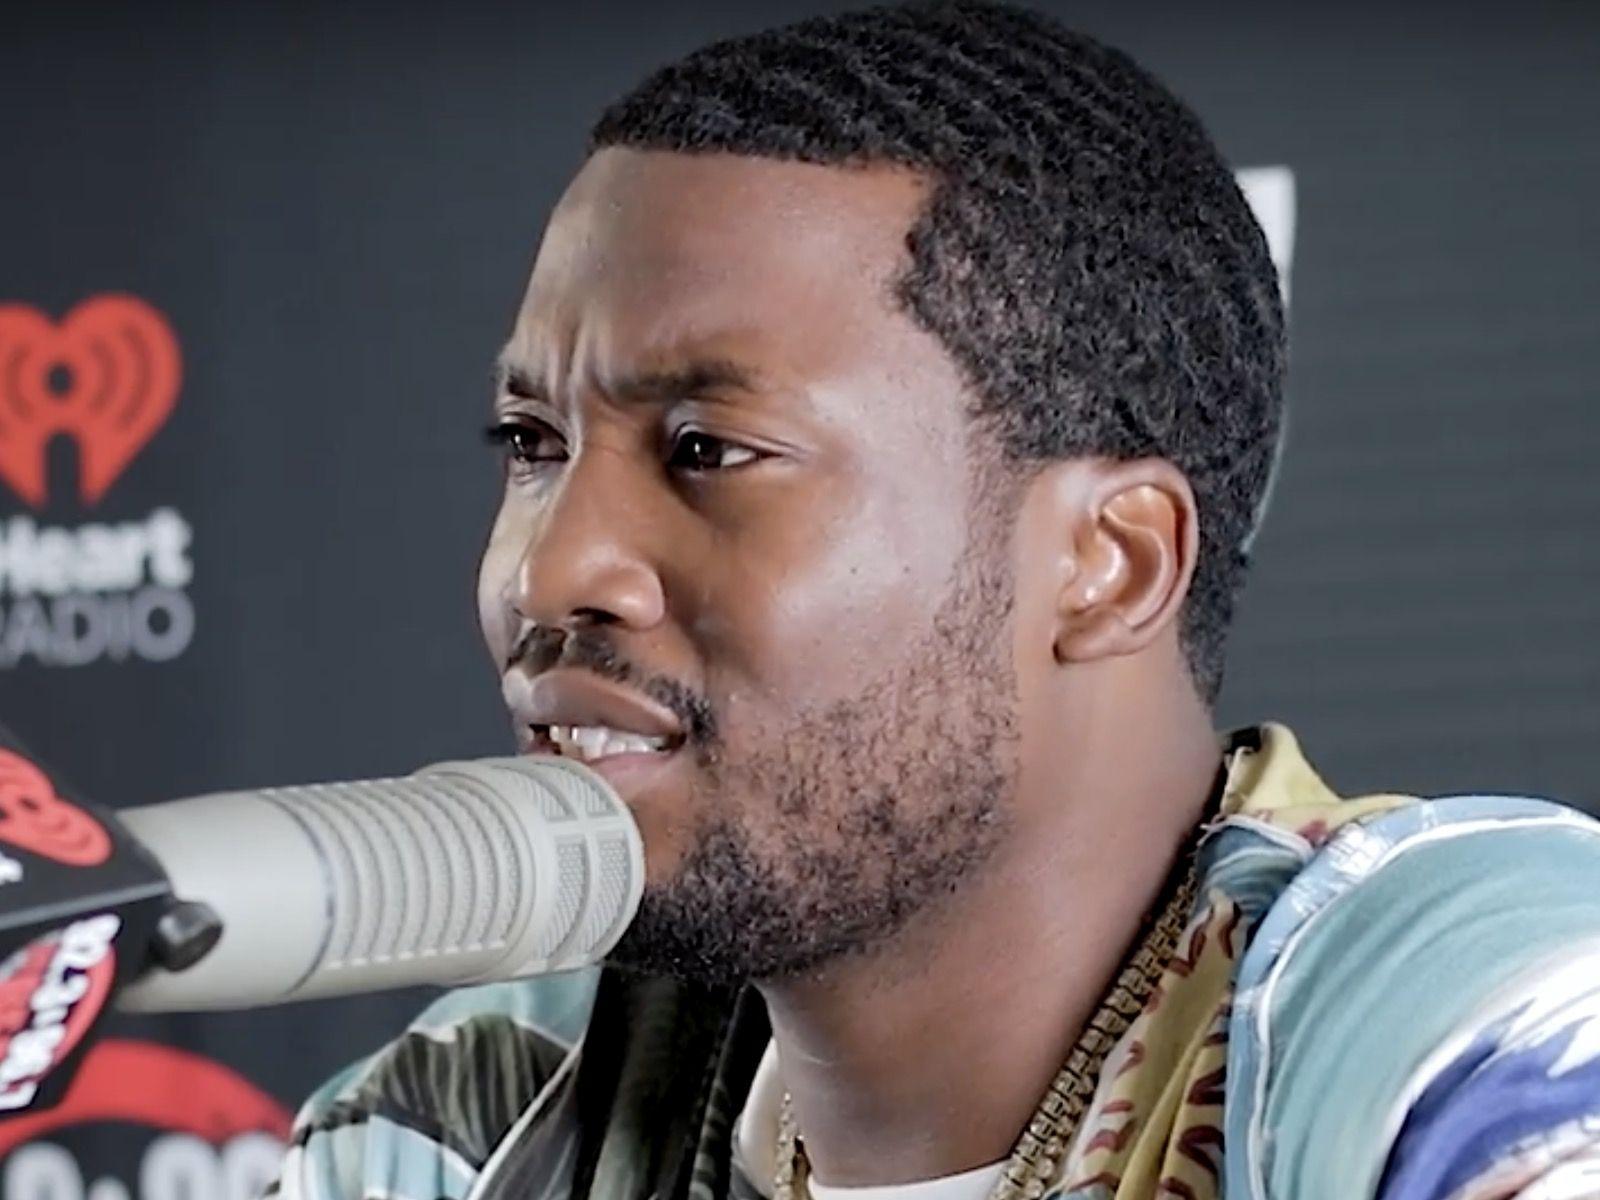 Meek Mill Catches Major Setback In Prison Release Hopes, Court